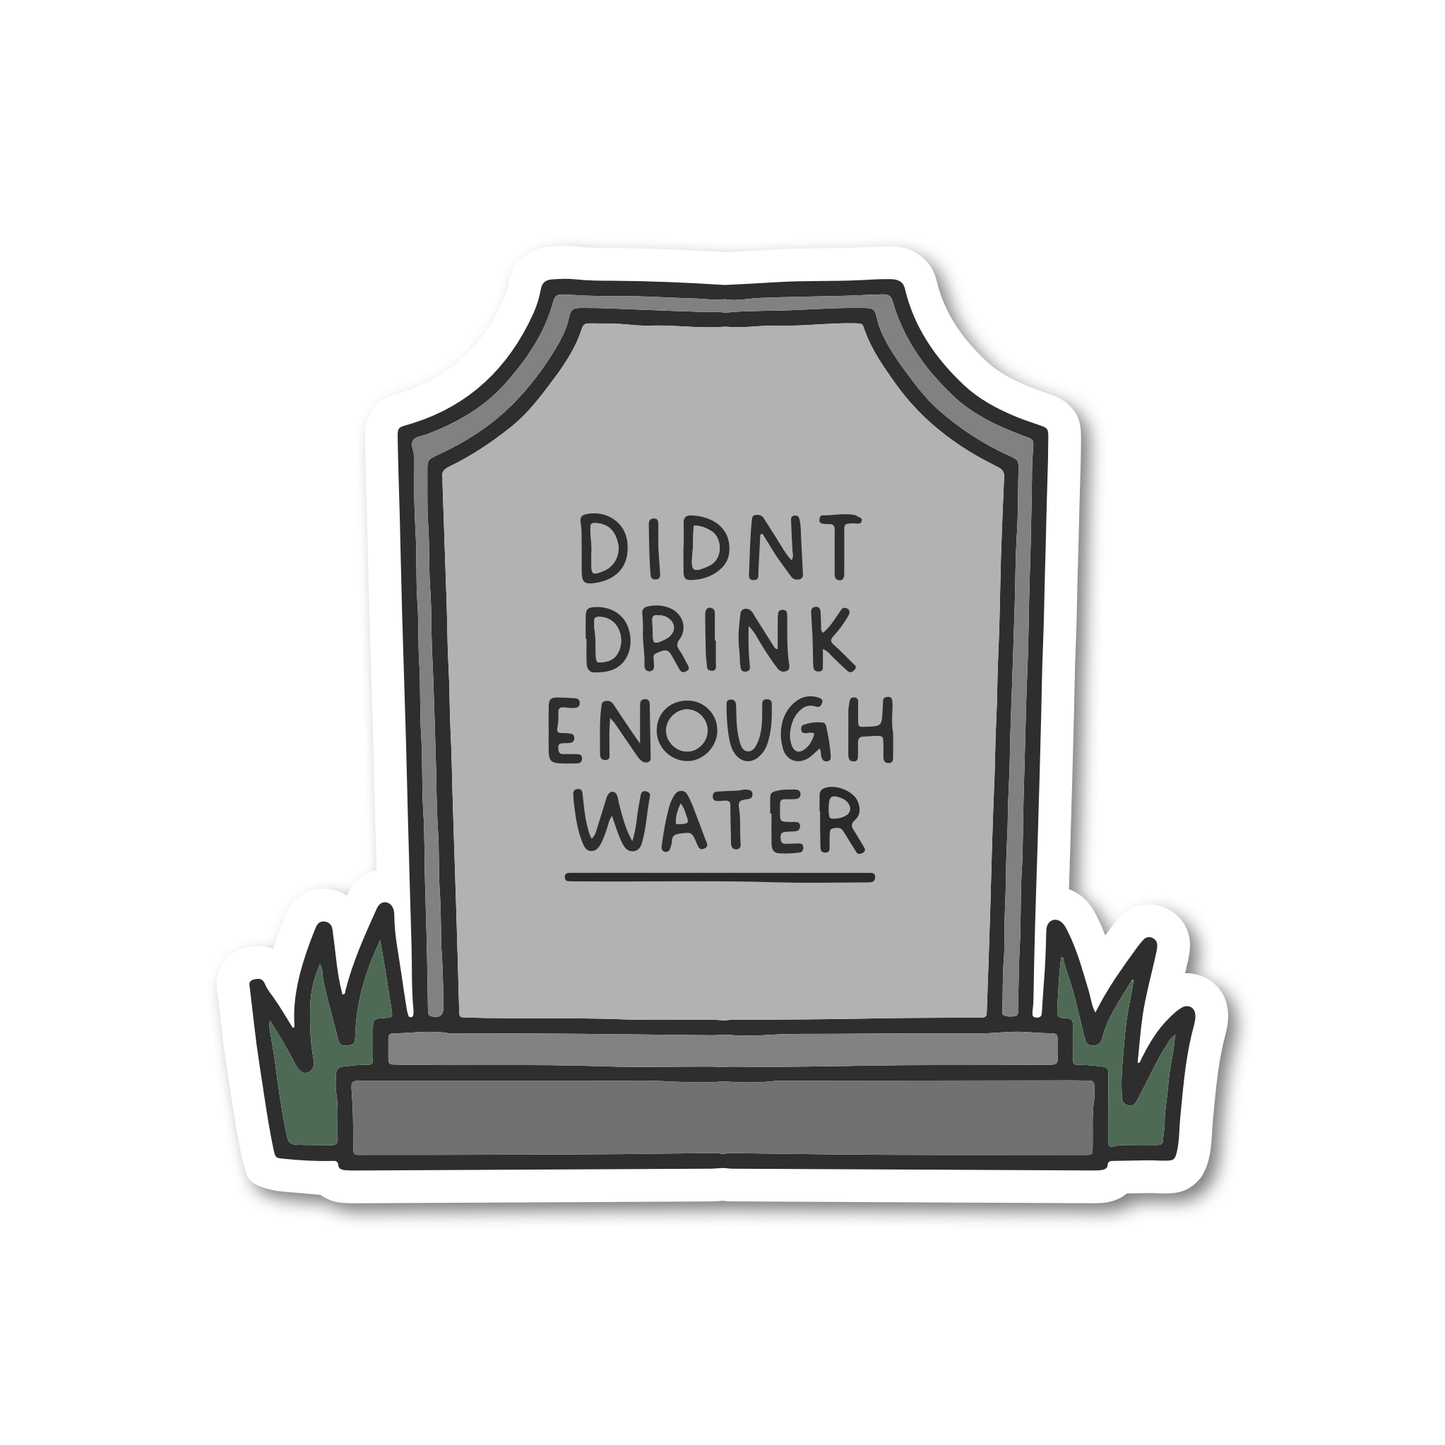 didn't drink enough water tombstone sticker